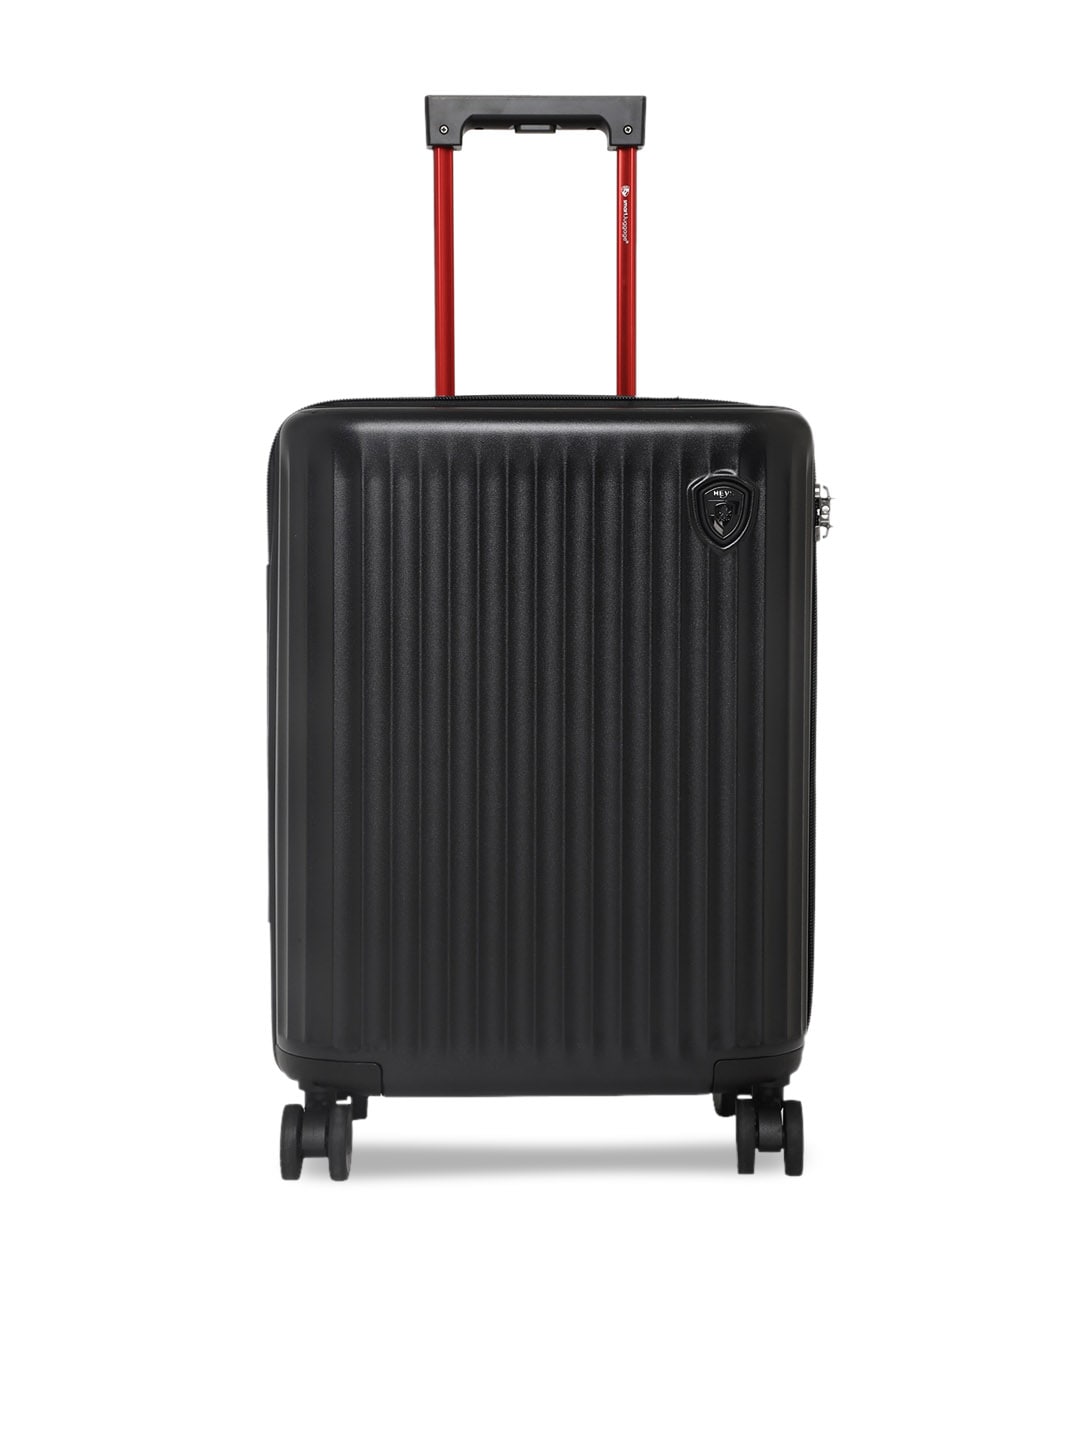 Calvin Klein Black Textured Hard-Sided Cabin Trolley Suitcase Price in India